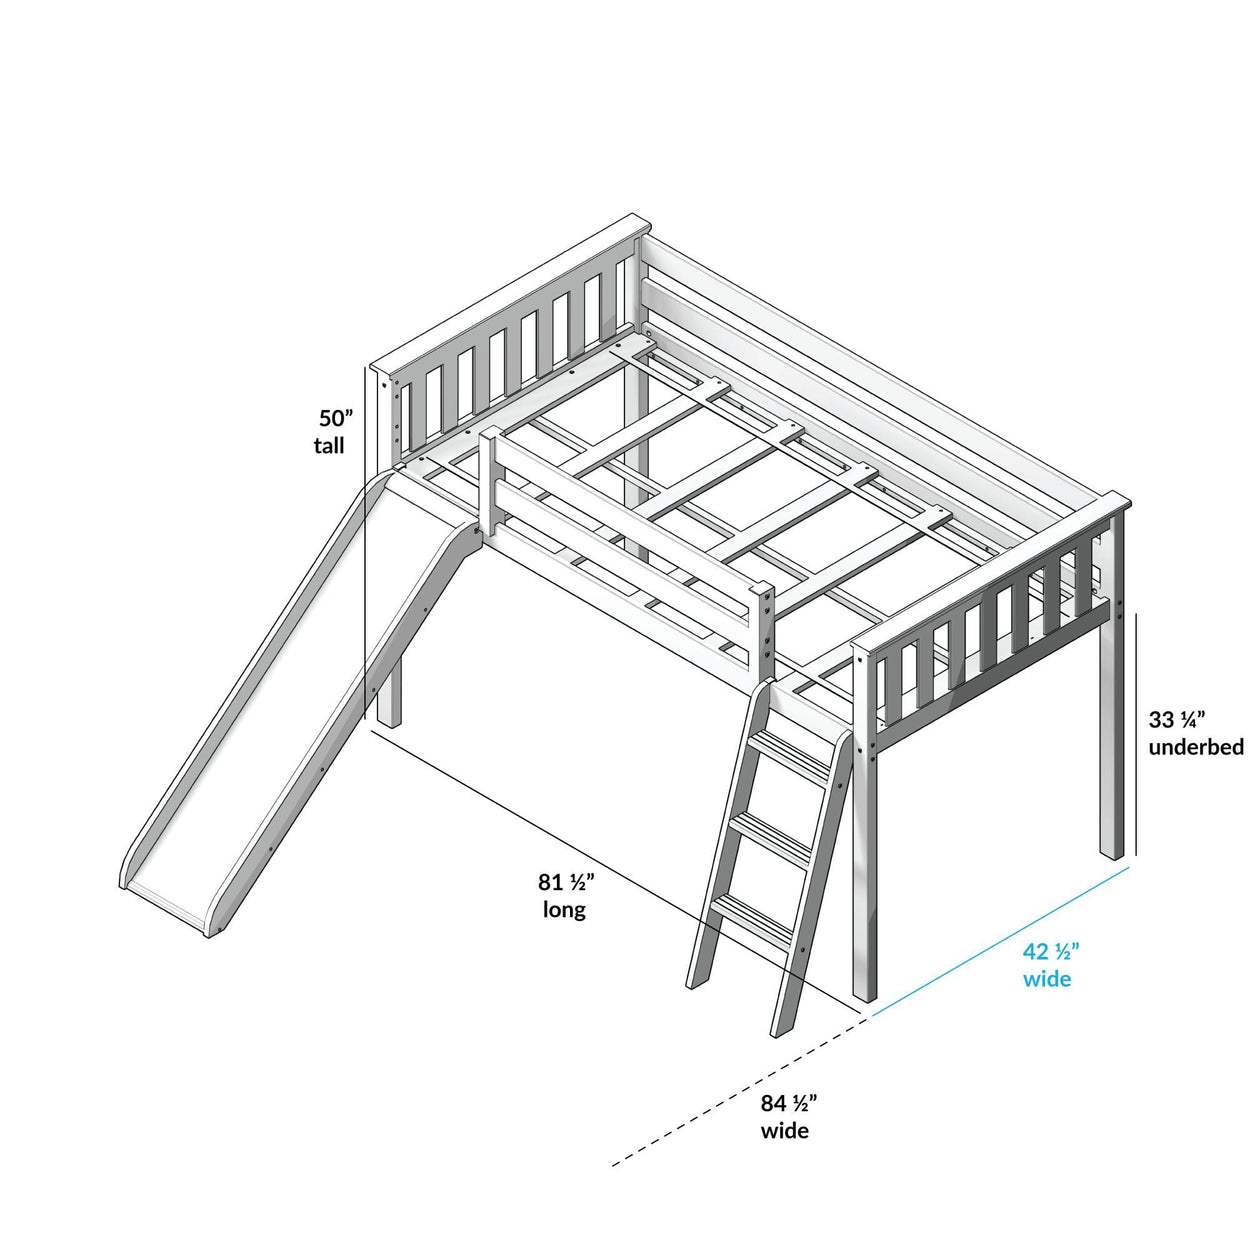 180213151054 : Loft Beds Twin-Size Low Loft with Slide with Curtain, Clay + Grey Curtain